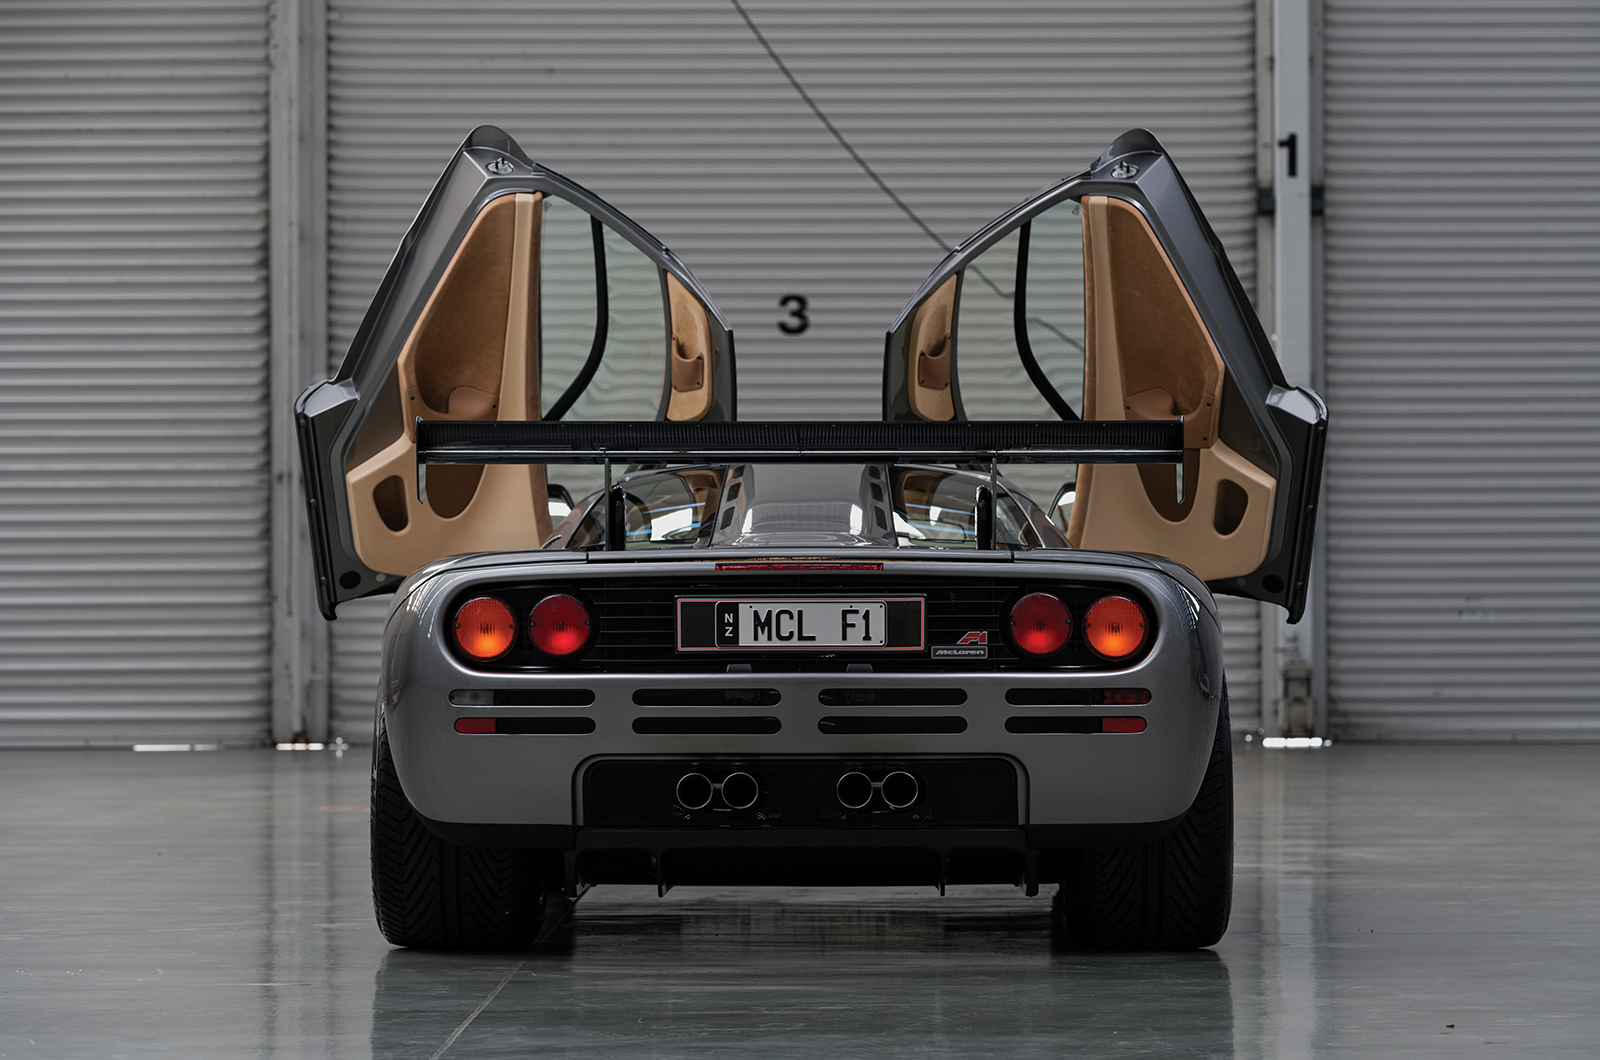 Classic & Sports Car – McLaren F1 in LM spec could fetch $23m at auction!